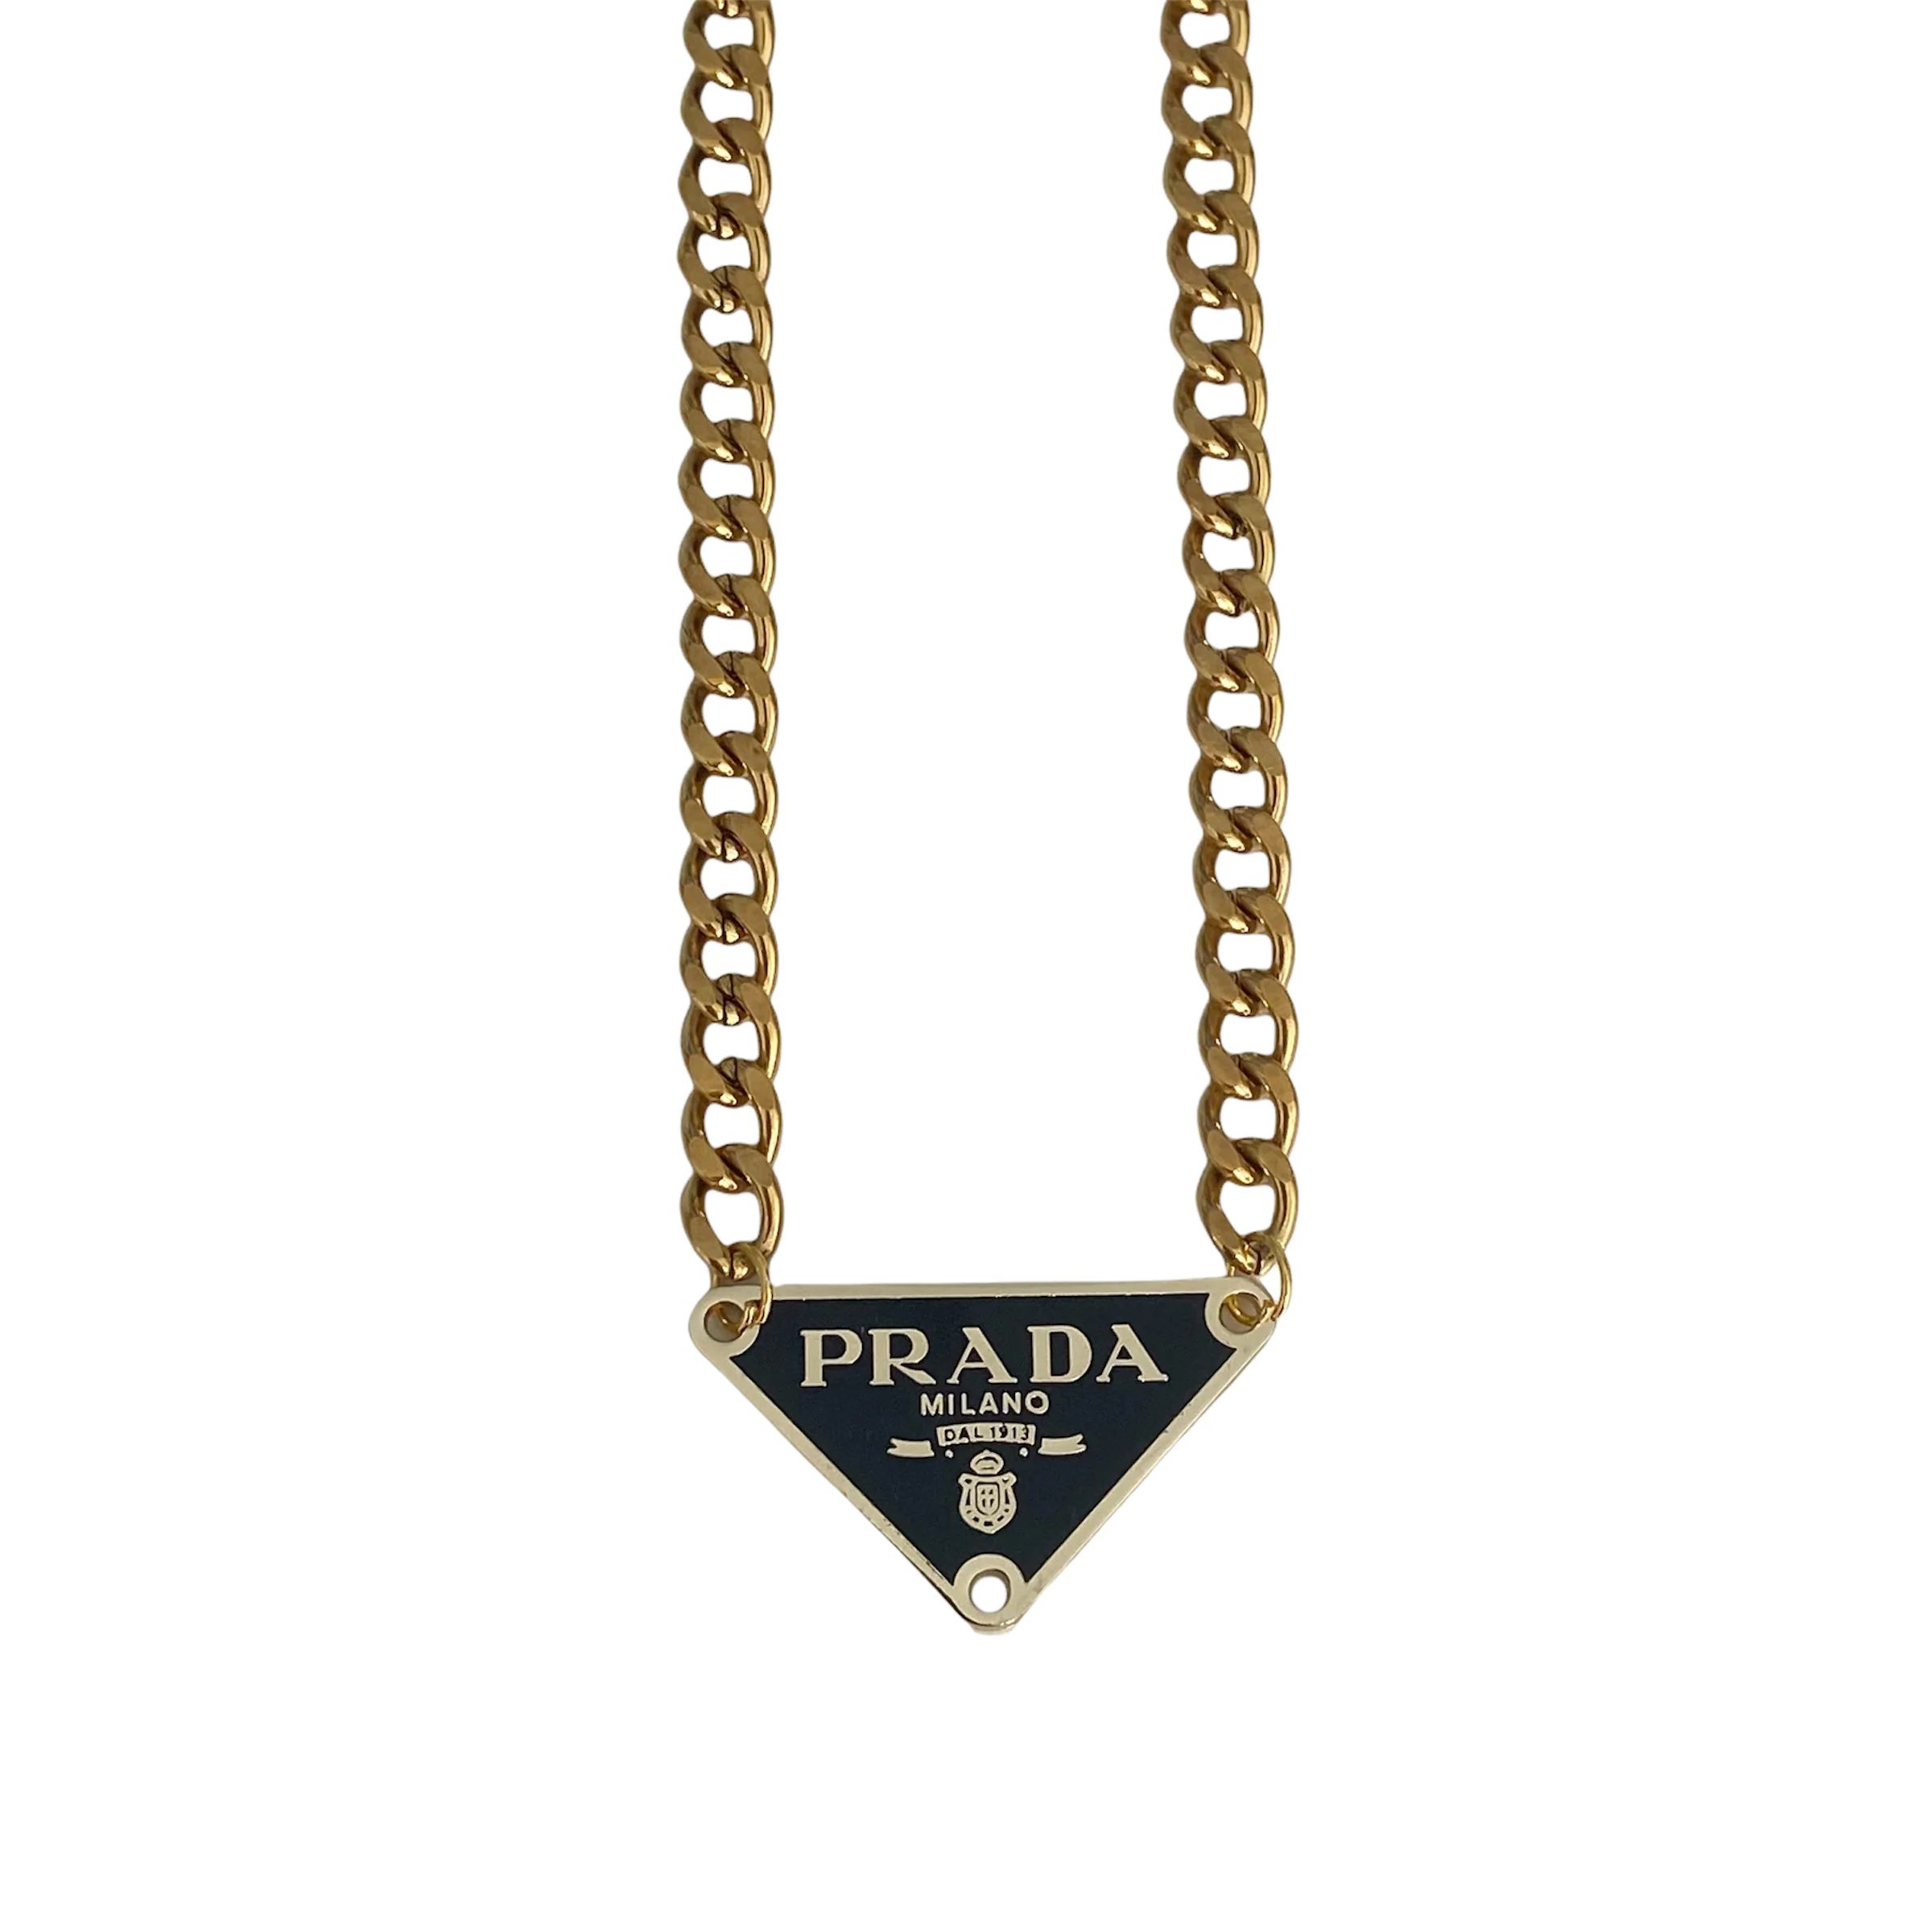 19-mind-blowing-facts-about-prada-necklace